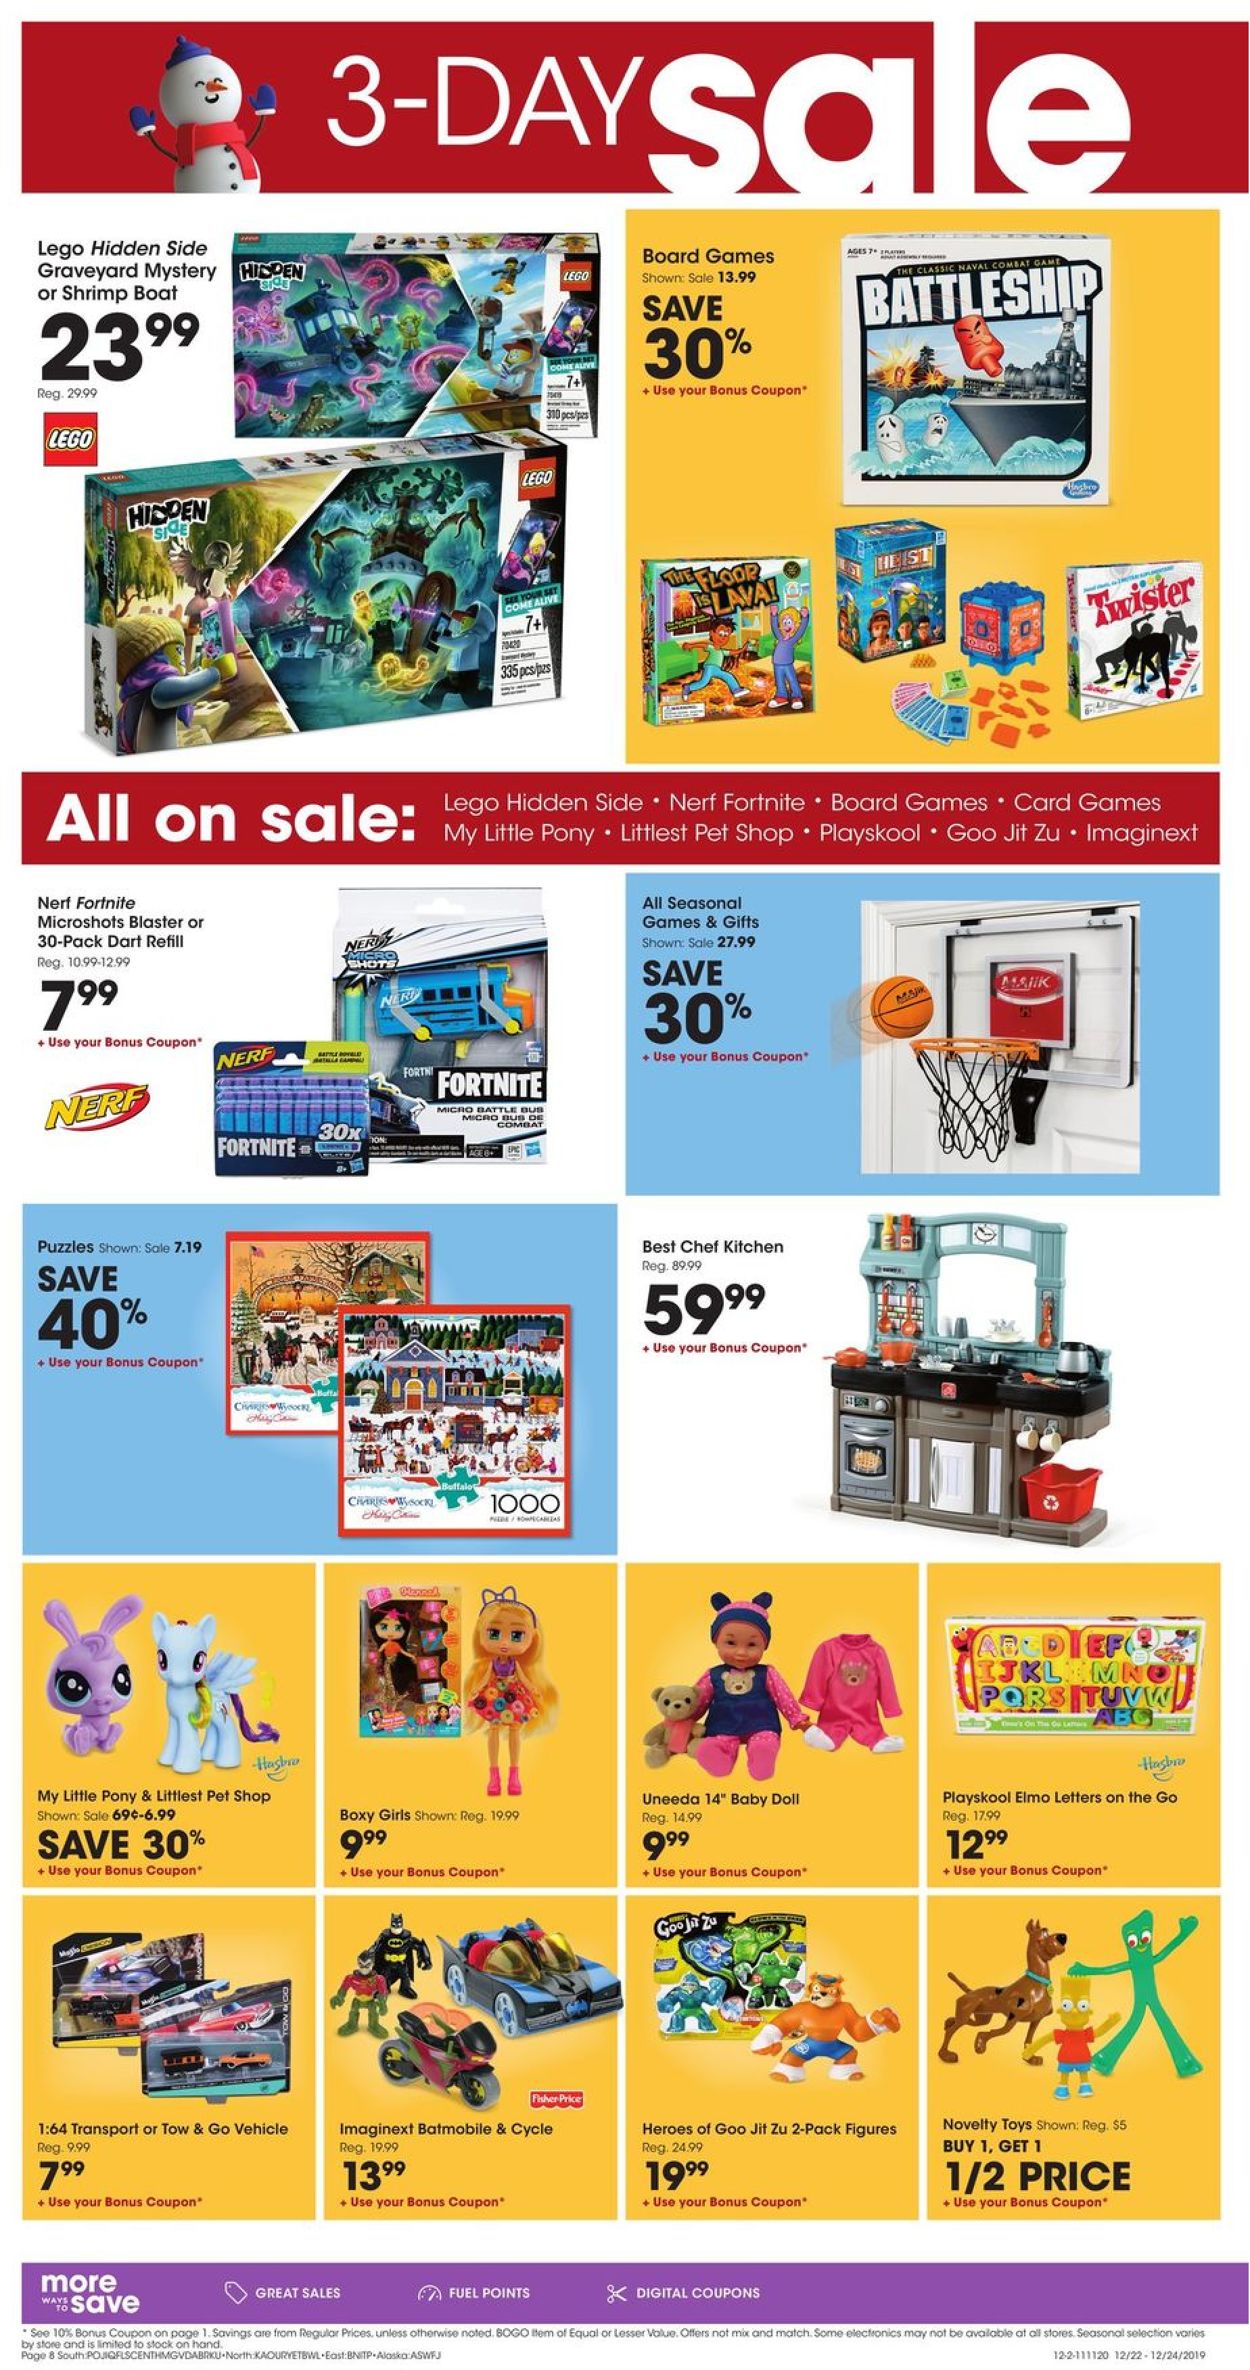 Fred Meyer - Christmas Sale Ad 2019 Weekly Ad Circular - valid 12/22-12/24/2019 (Page 8)